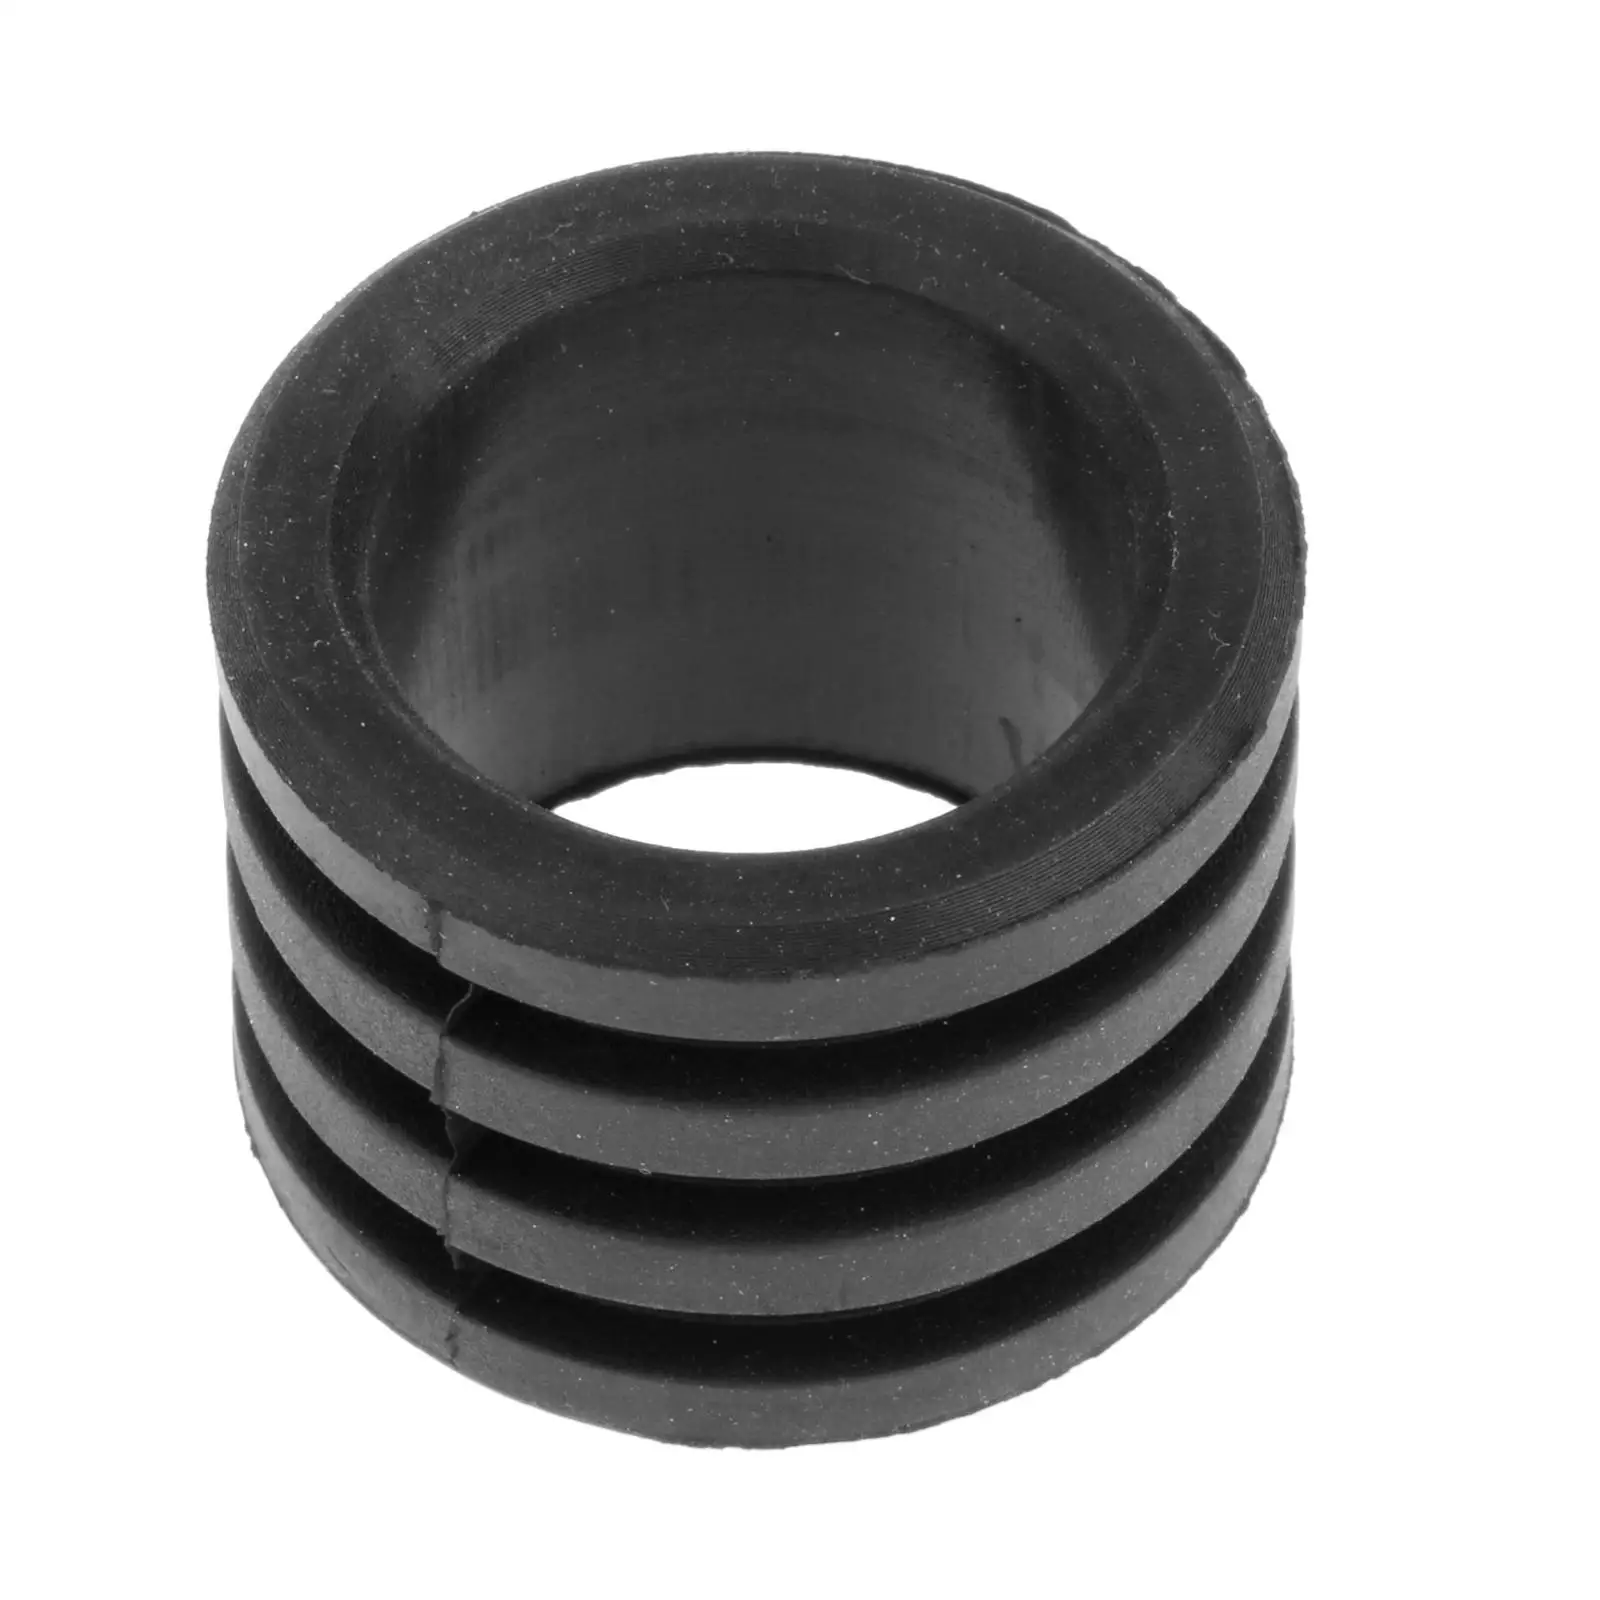 Exhaust Gasket Rubber Flange for 1984-2007 18365 KA4 730 Spare Parts